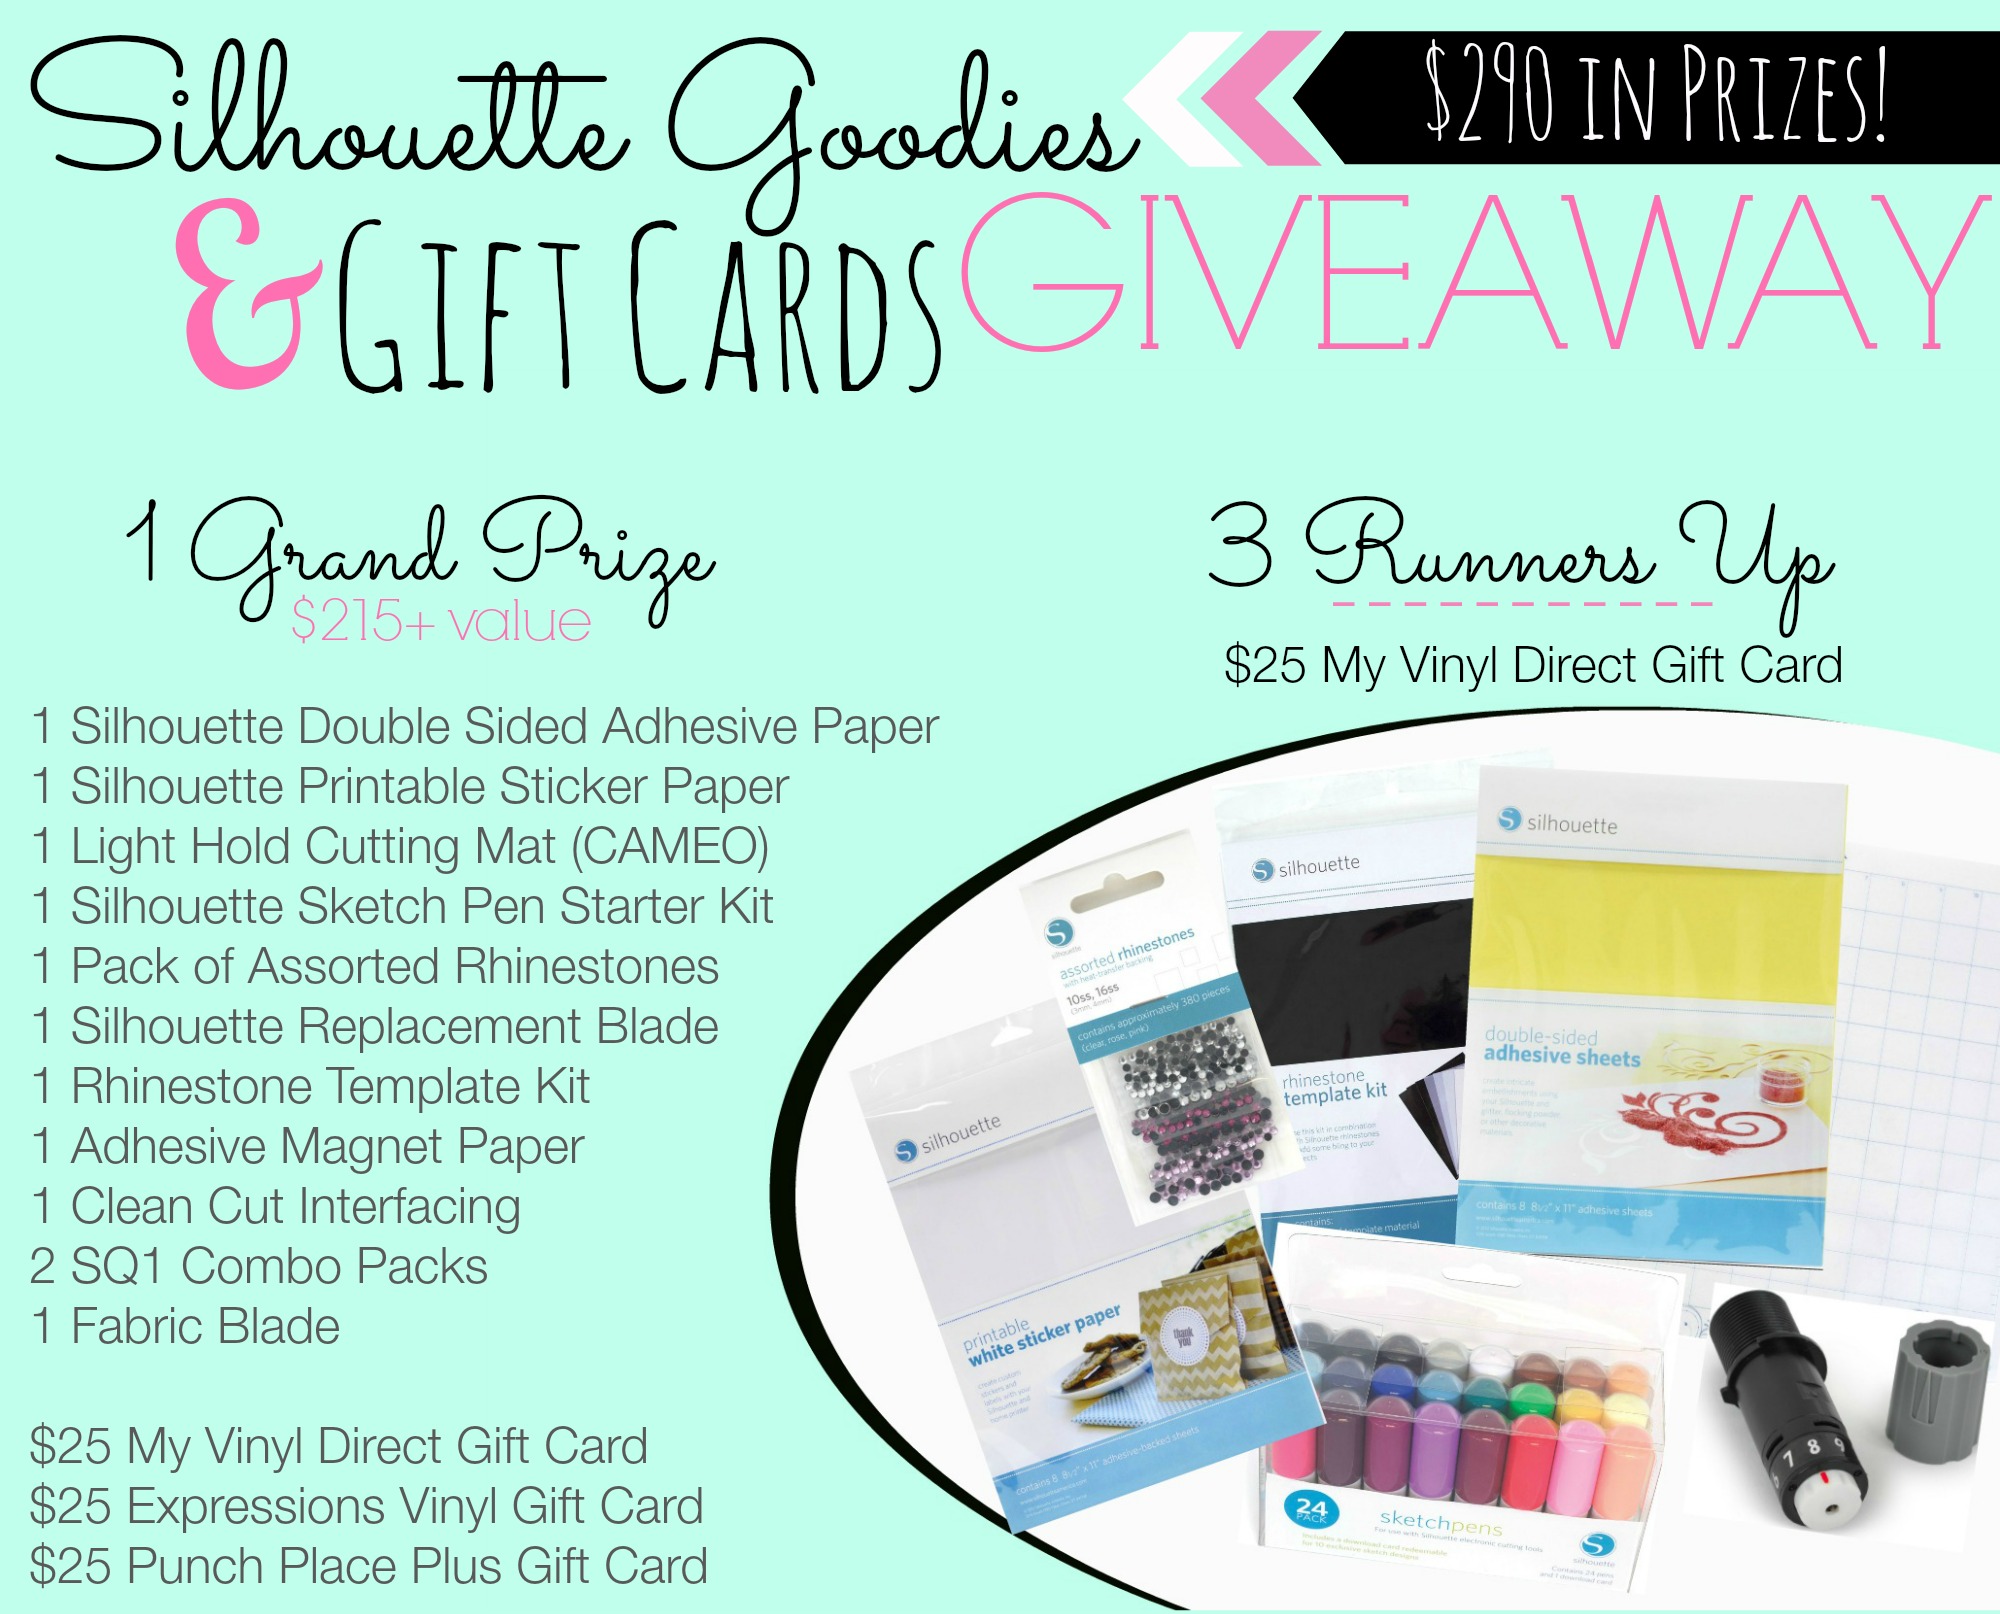 Silhouette Goodie Bag Giveaway